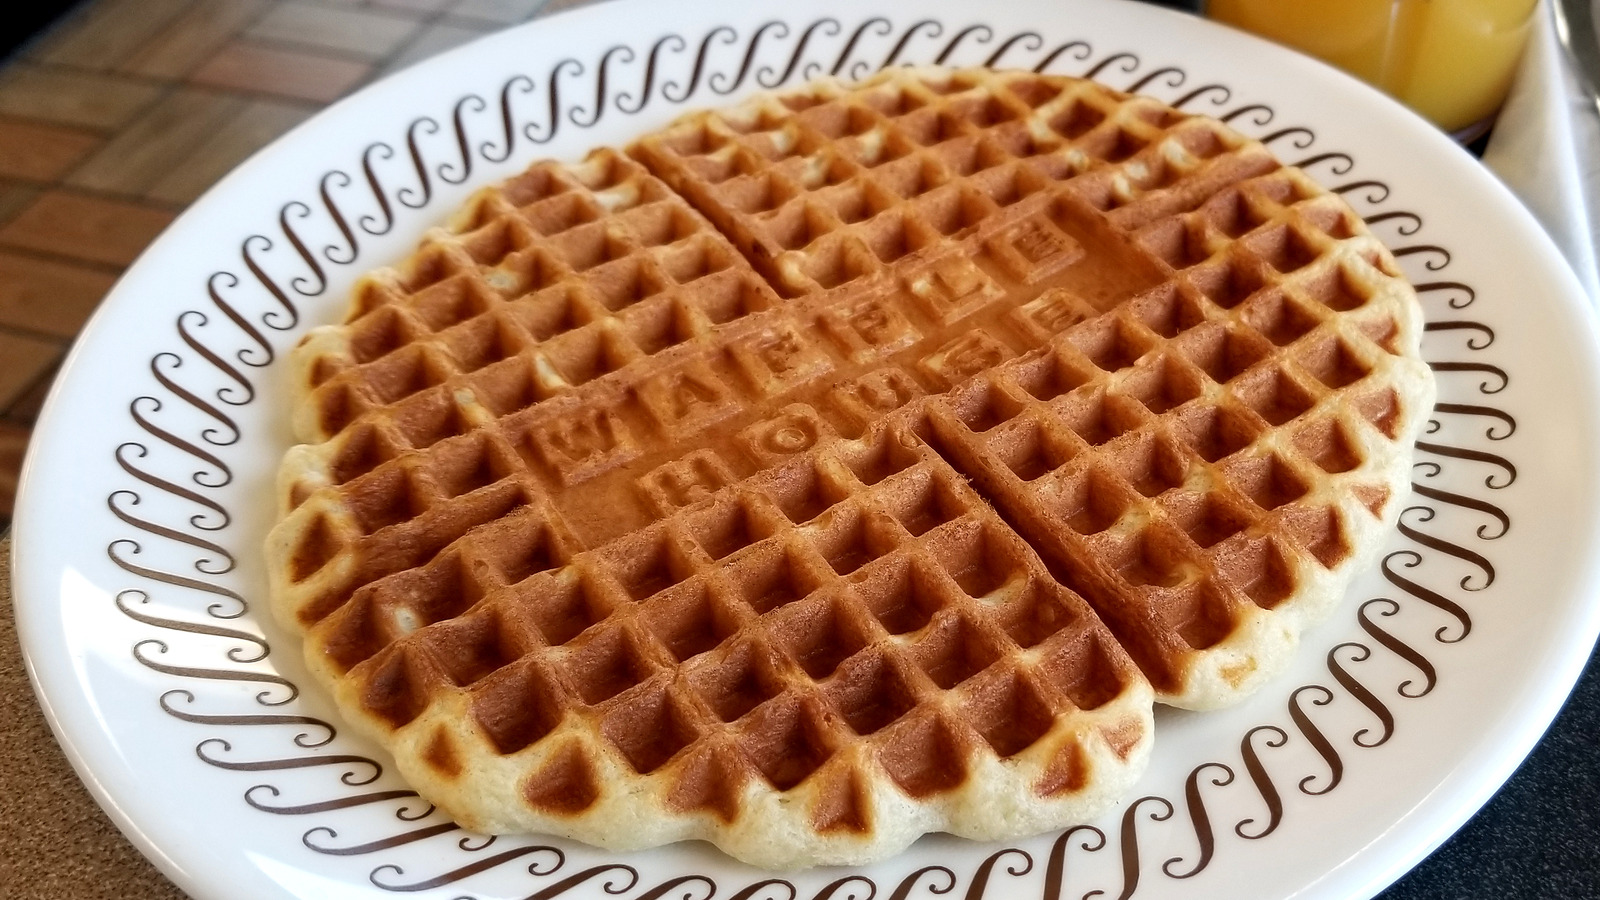 This Is What Makes Waffle House Waffles So Delicious